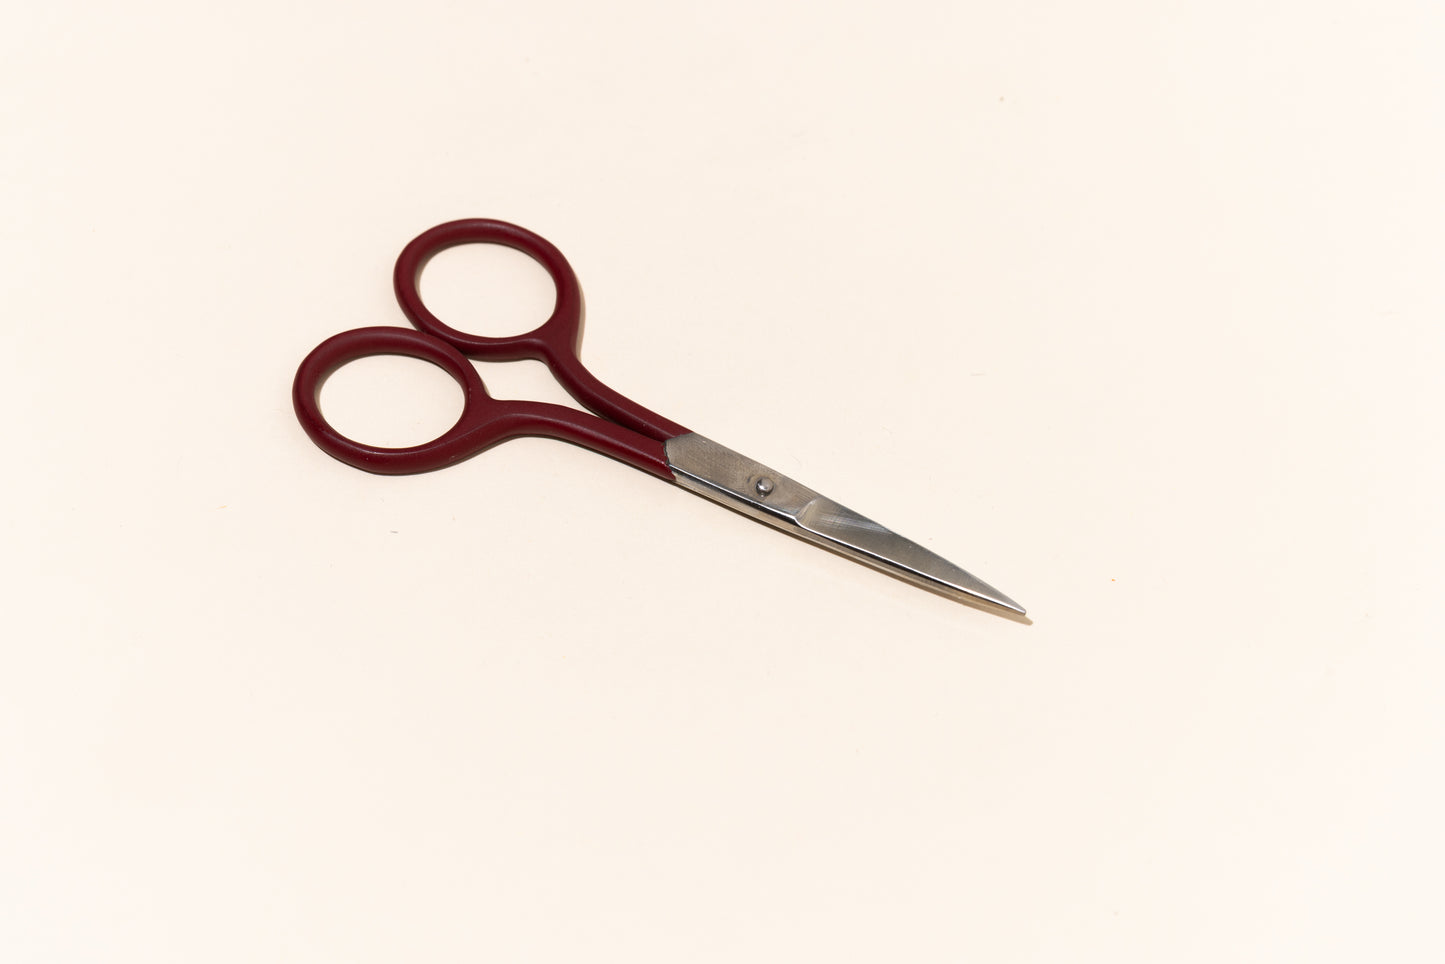 The Edit Embroidery scissors